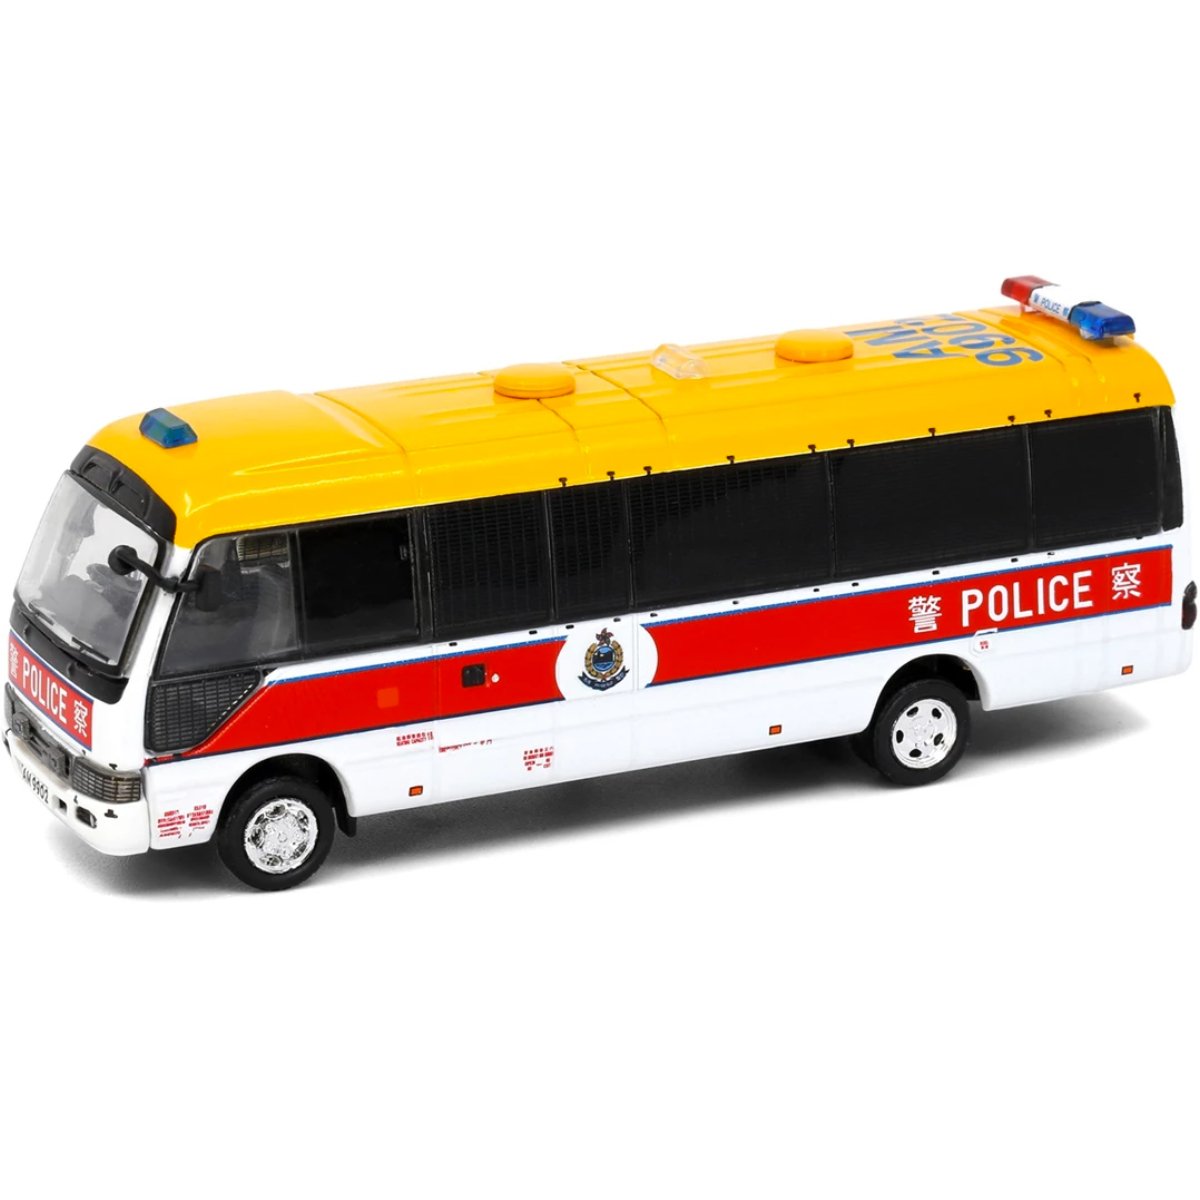 Tiny Models Toyota Coaster B59 Police APT AM9902 (1:76 Scale) - Phillips Hobbies